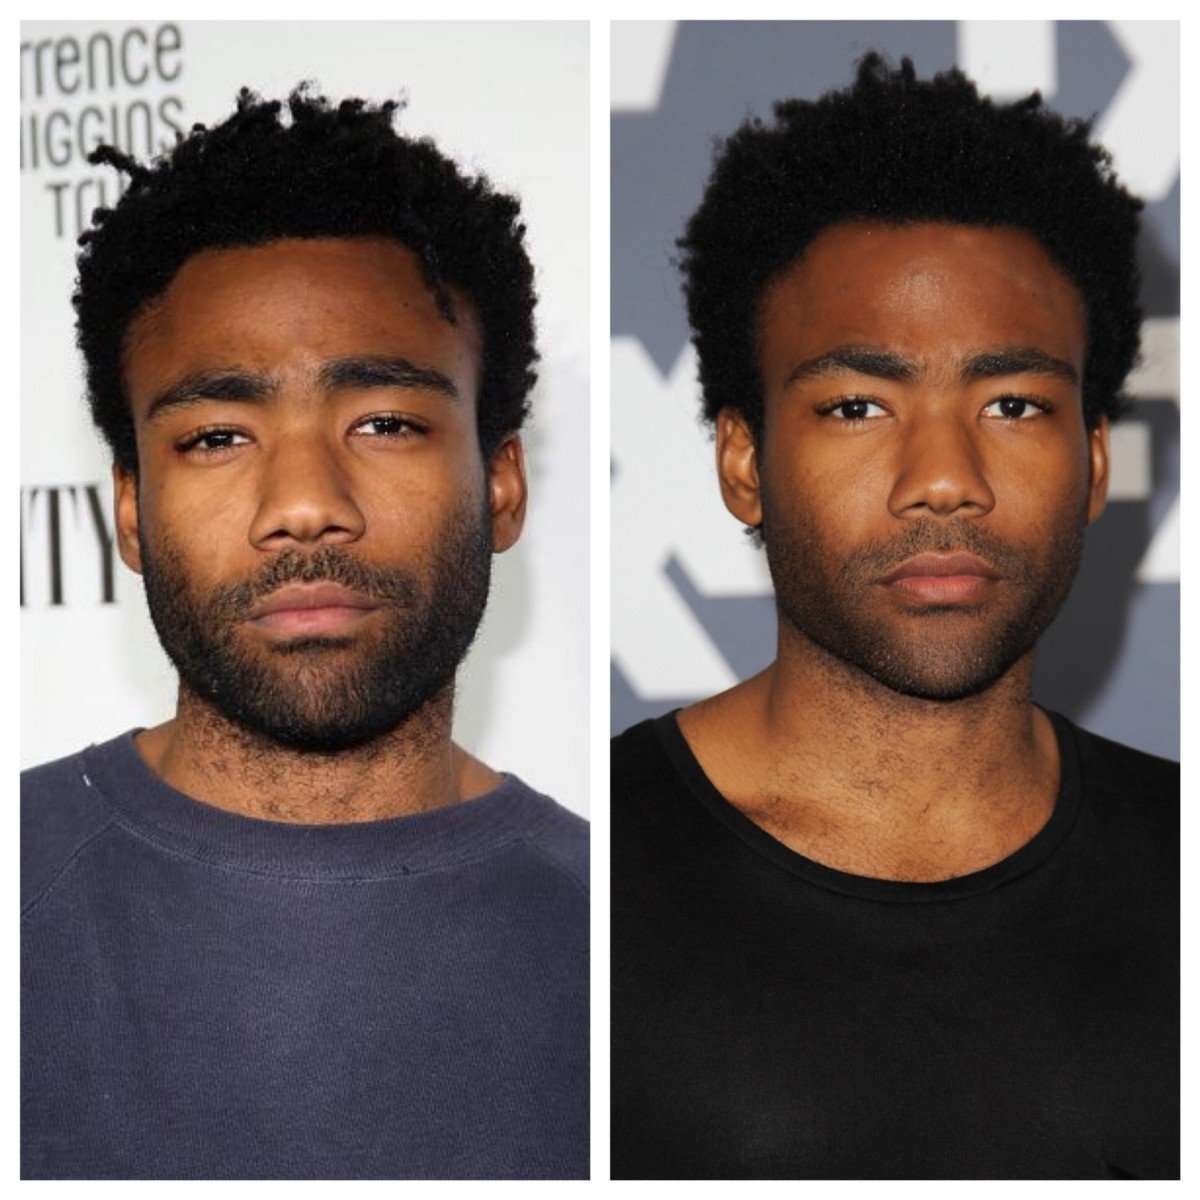 image for I Have A Theory That Donald Glover And Childish Gambino Are Secretly The Same Person